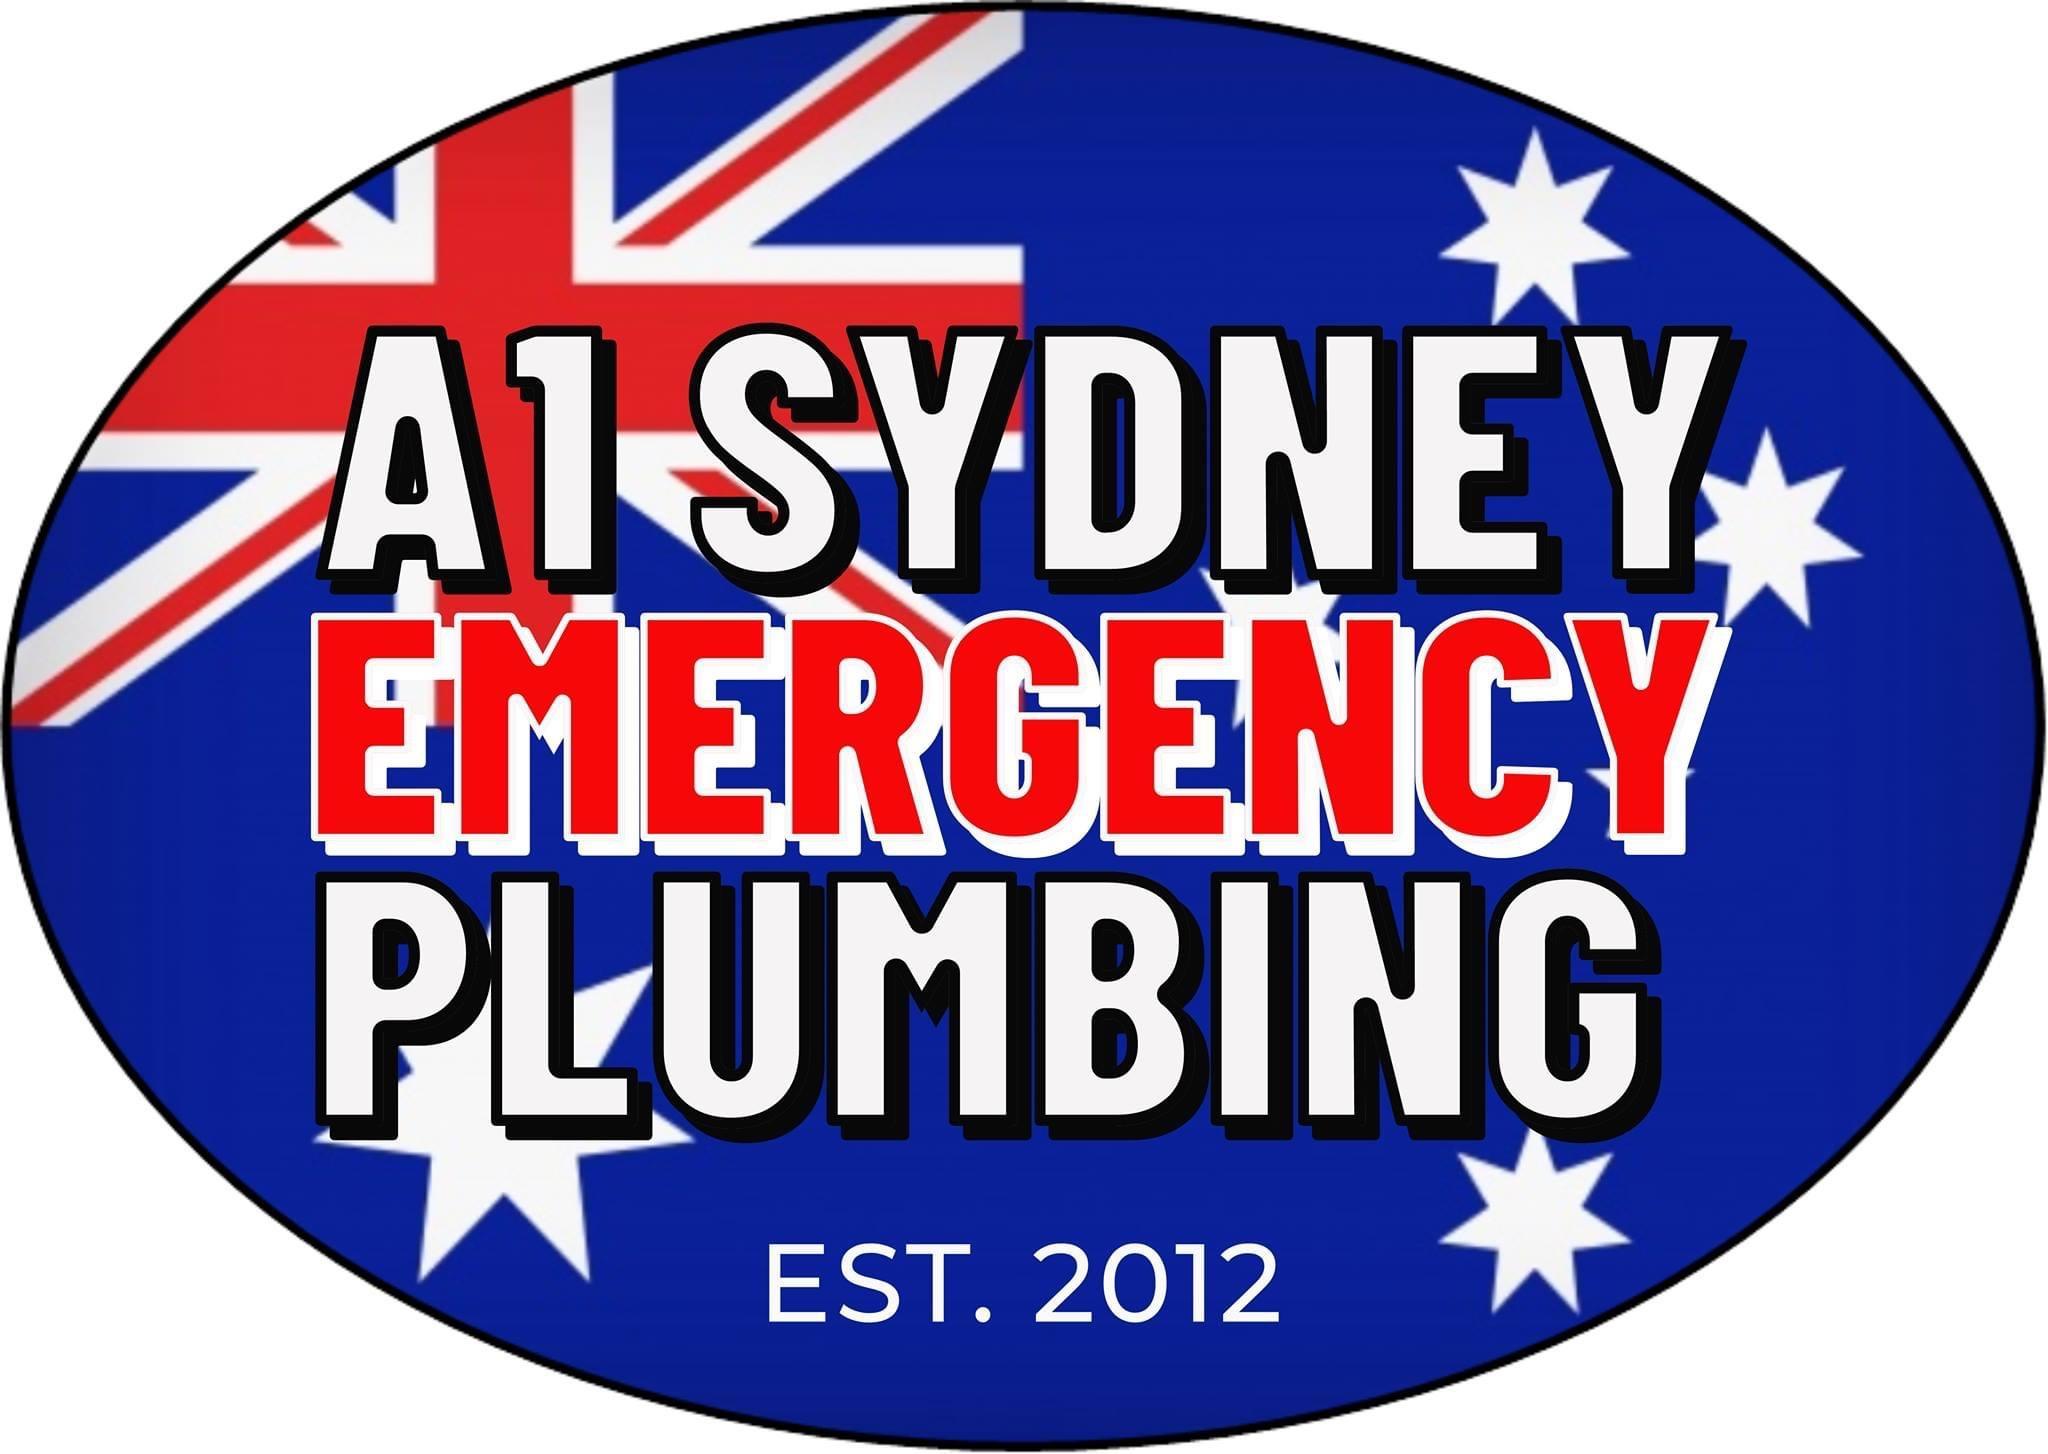 A1 Sydney Emergency Plumbing Pty Ltd | home goods store | Online estimates · On-site services not available | 0437088844 OR +61 437 088 844